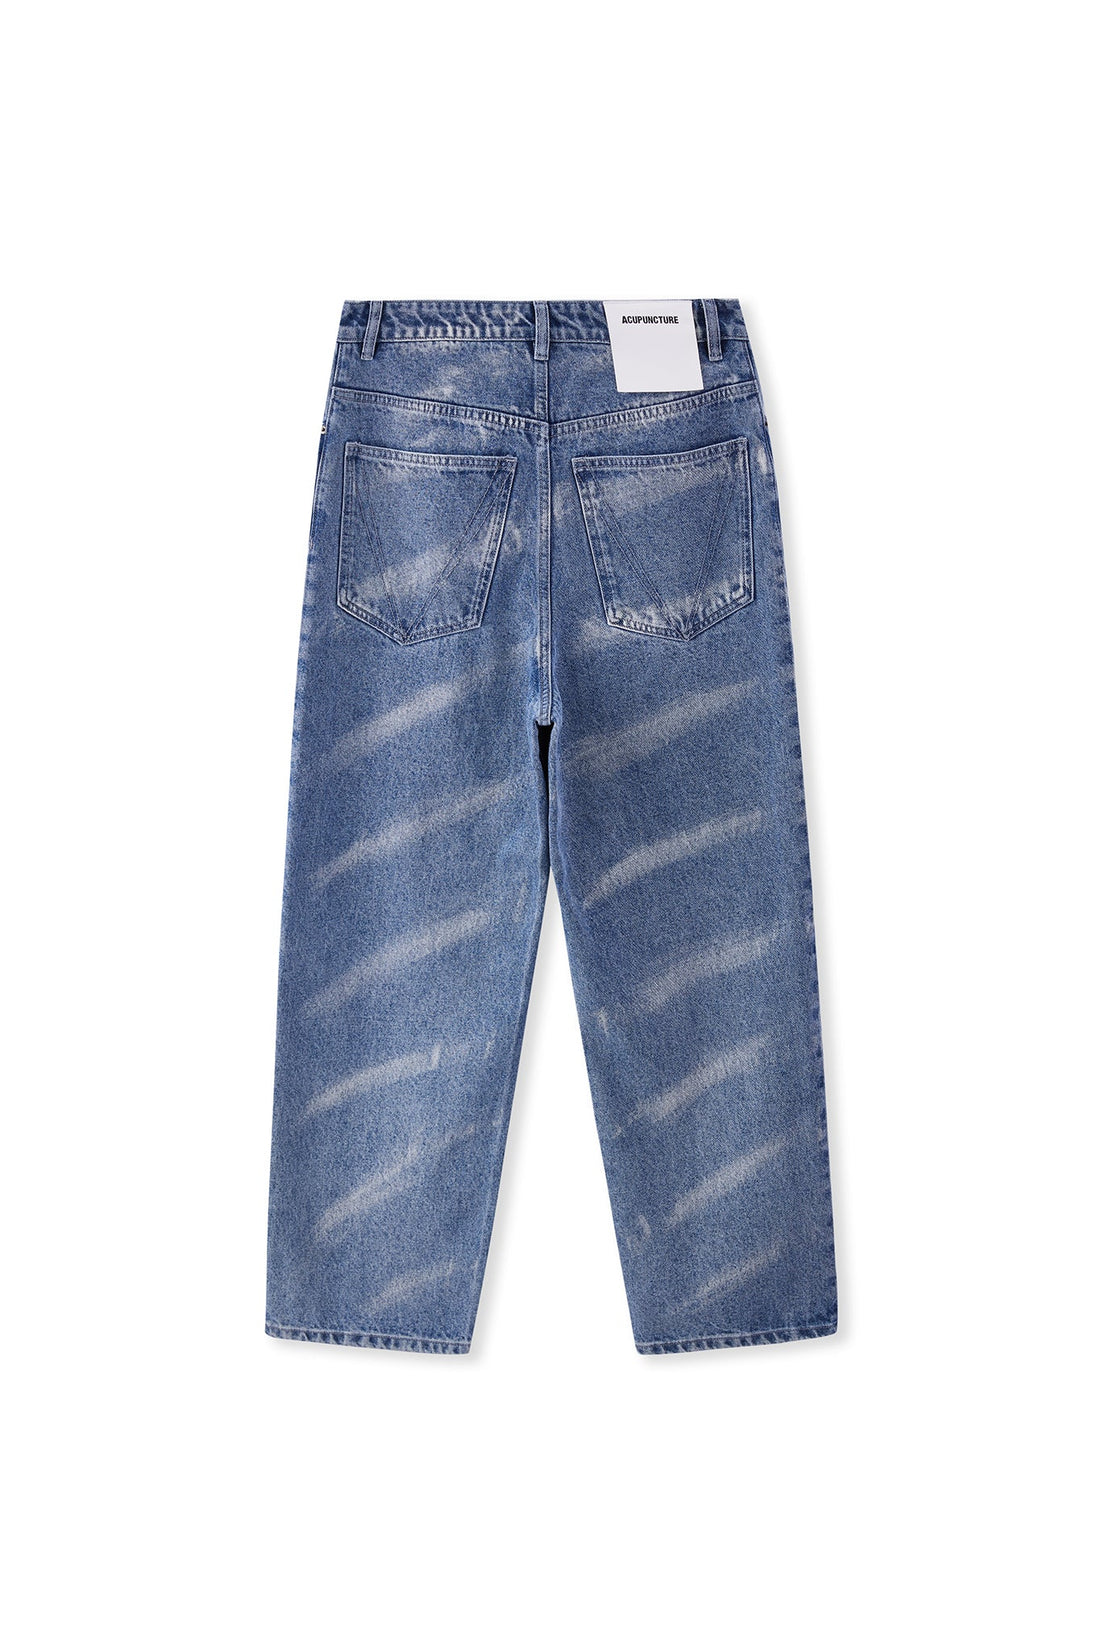 RIPPLE JEANS BLUE Acupuncture